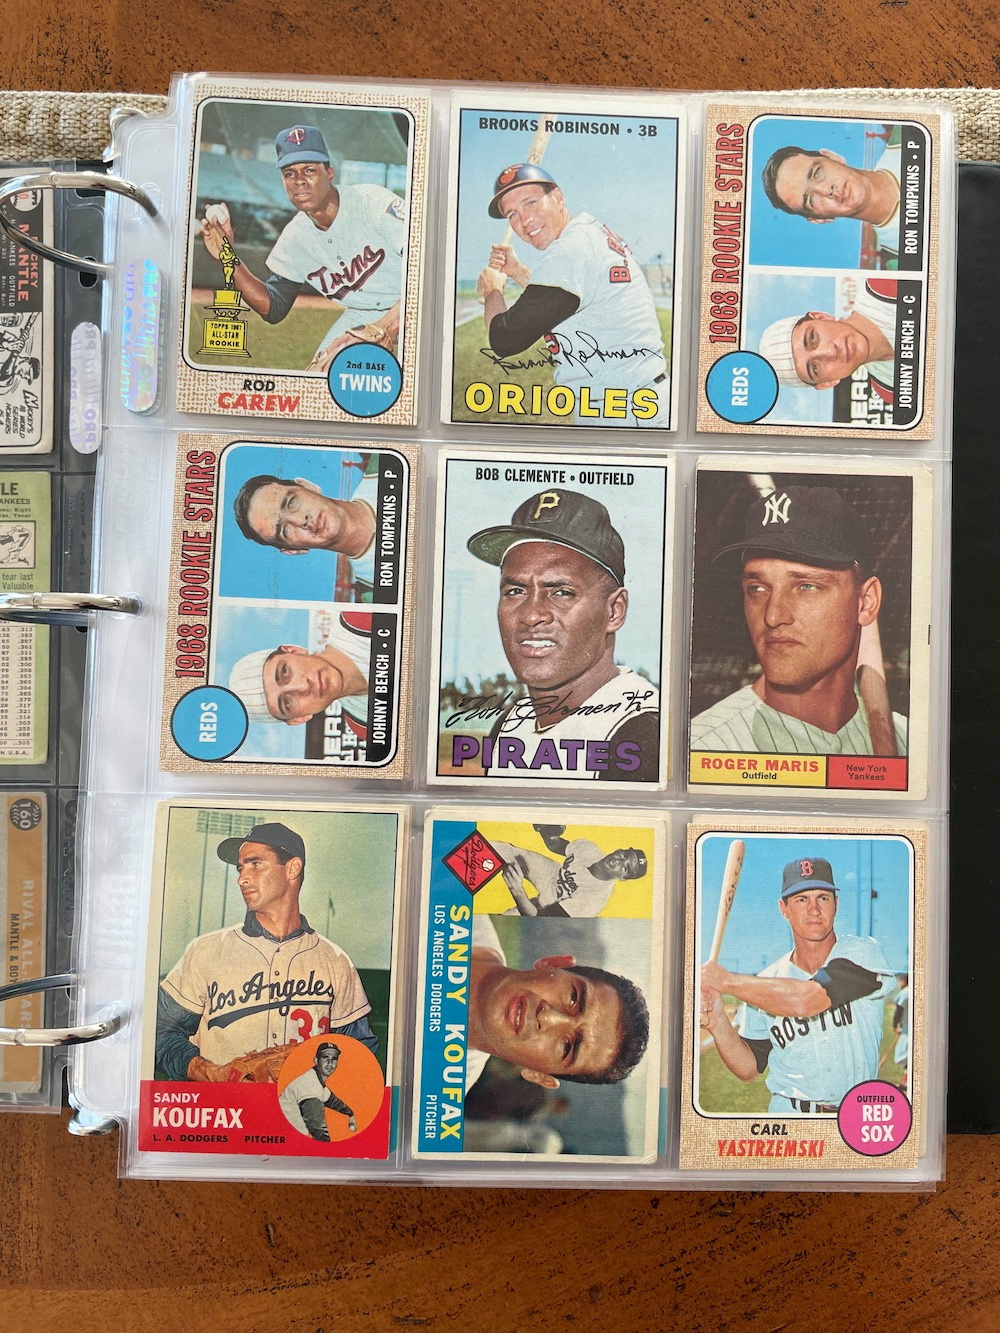 Thanks, Mom, for not throwing out my baseball cards